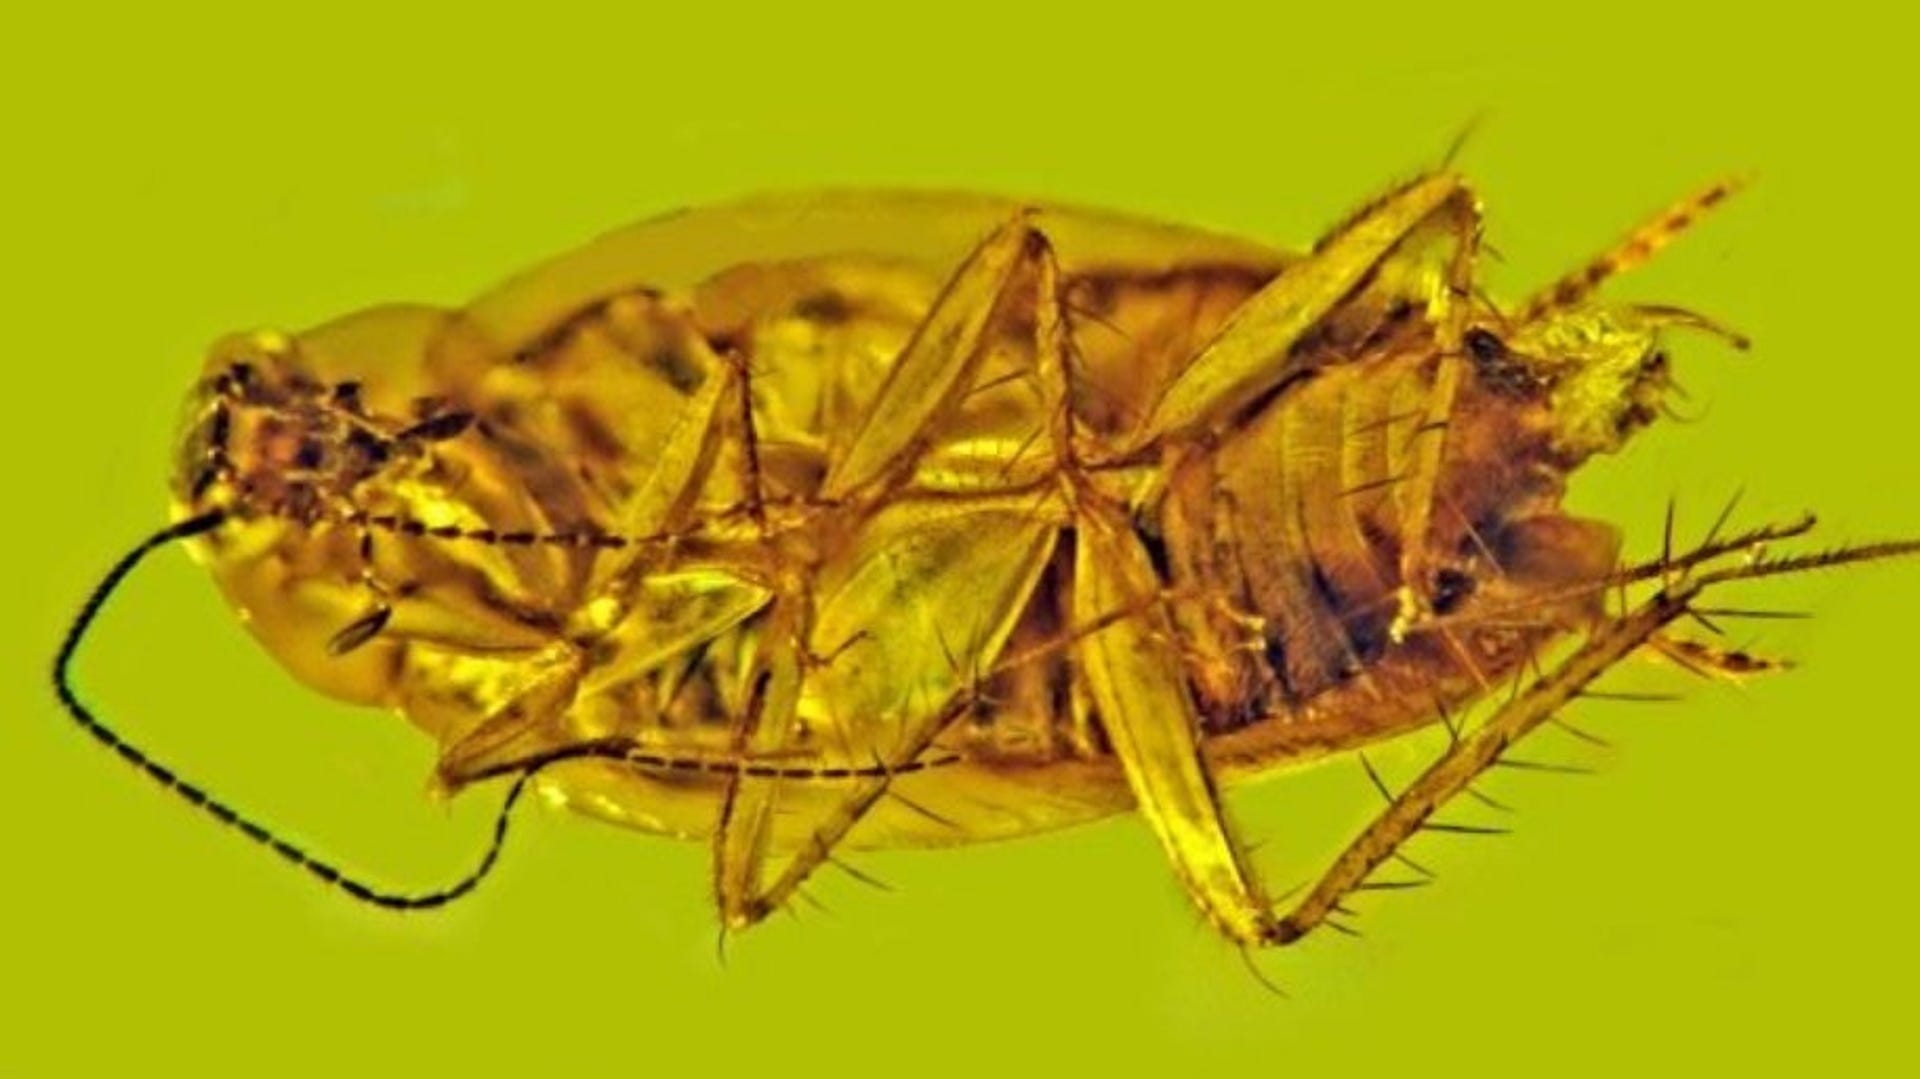 Underside of a cockroach entombed in amber. Remarkably well preserved, sperm cells intact.